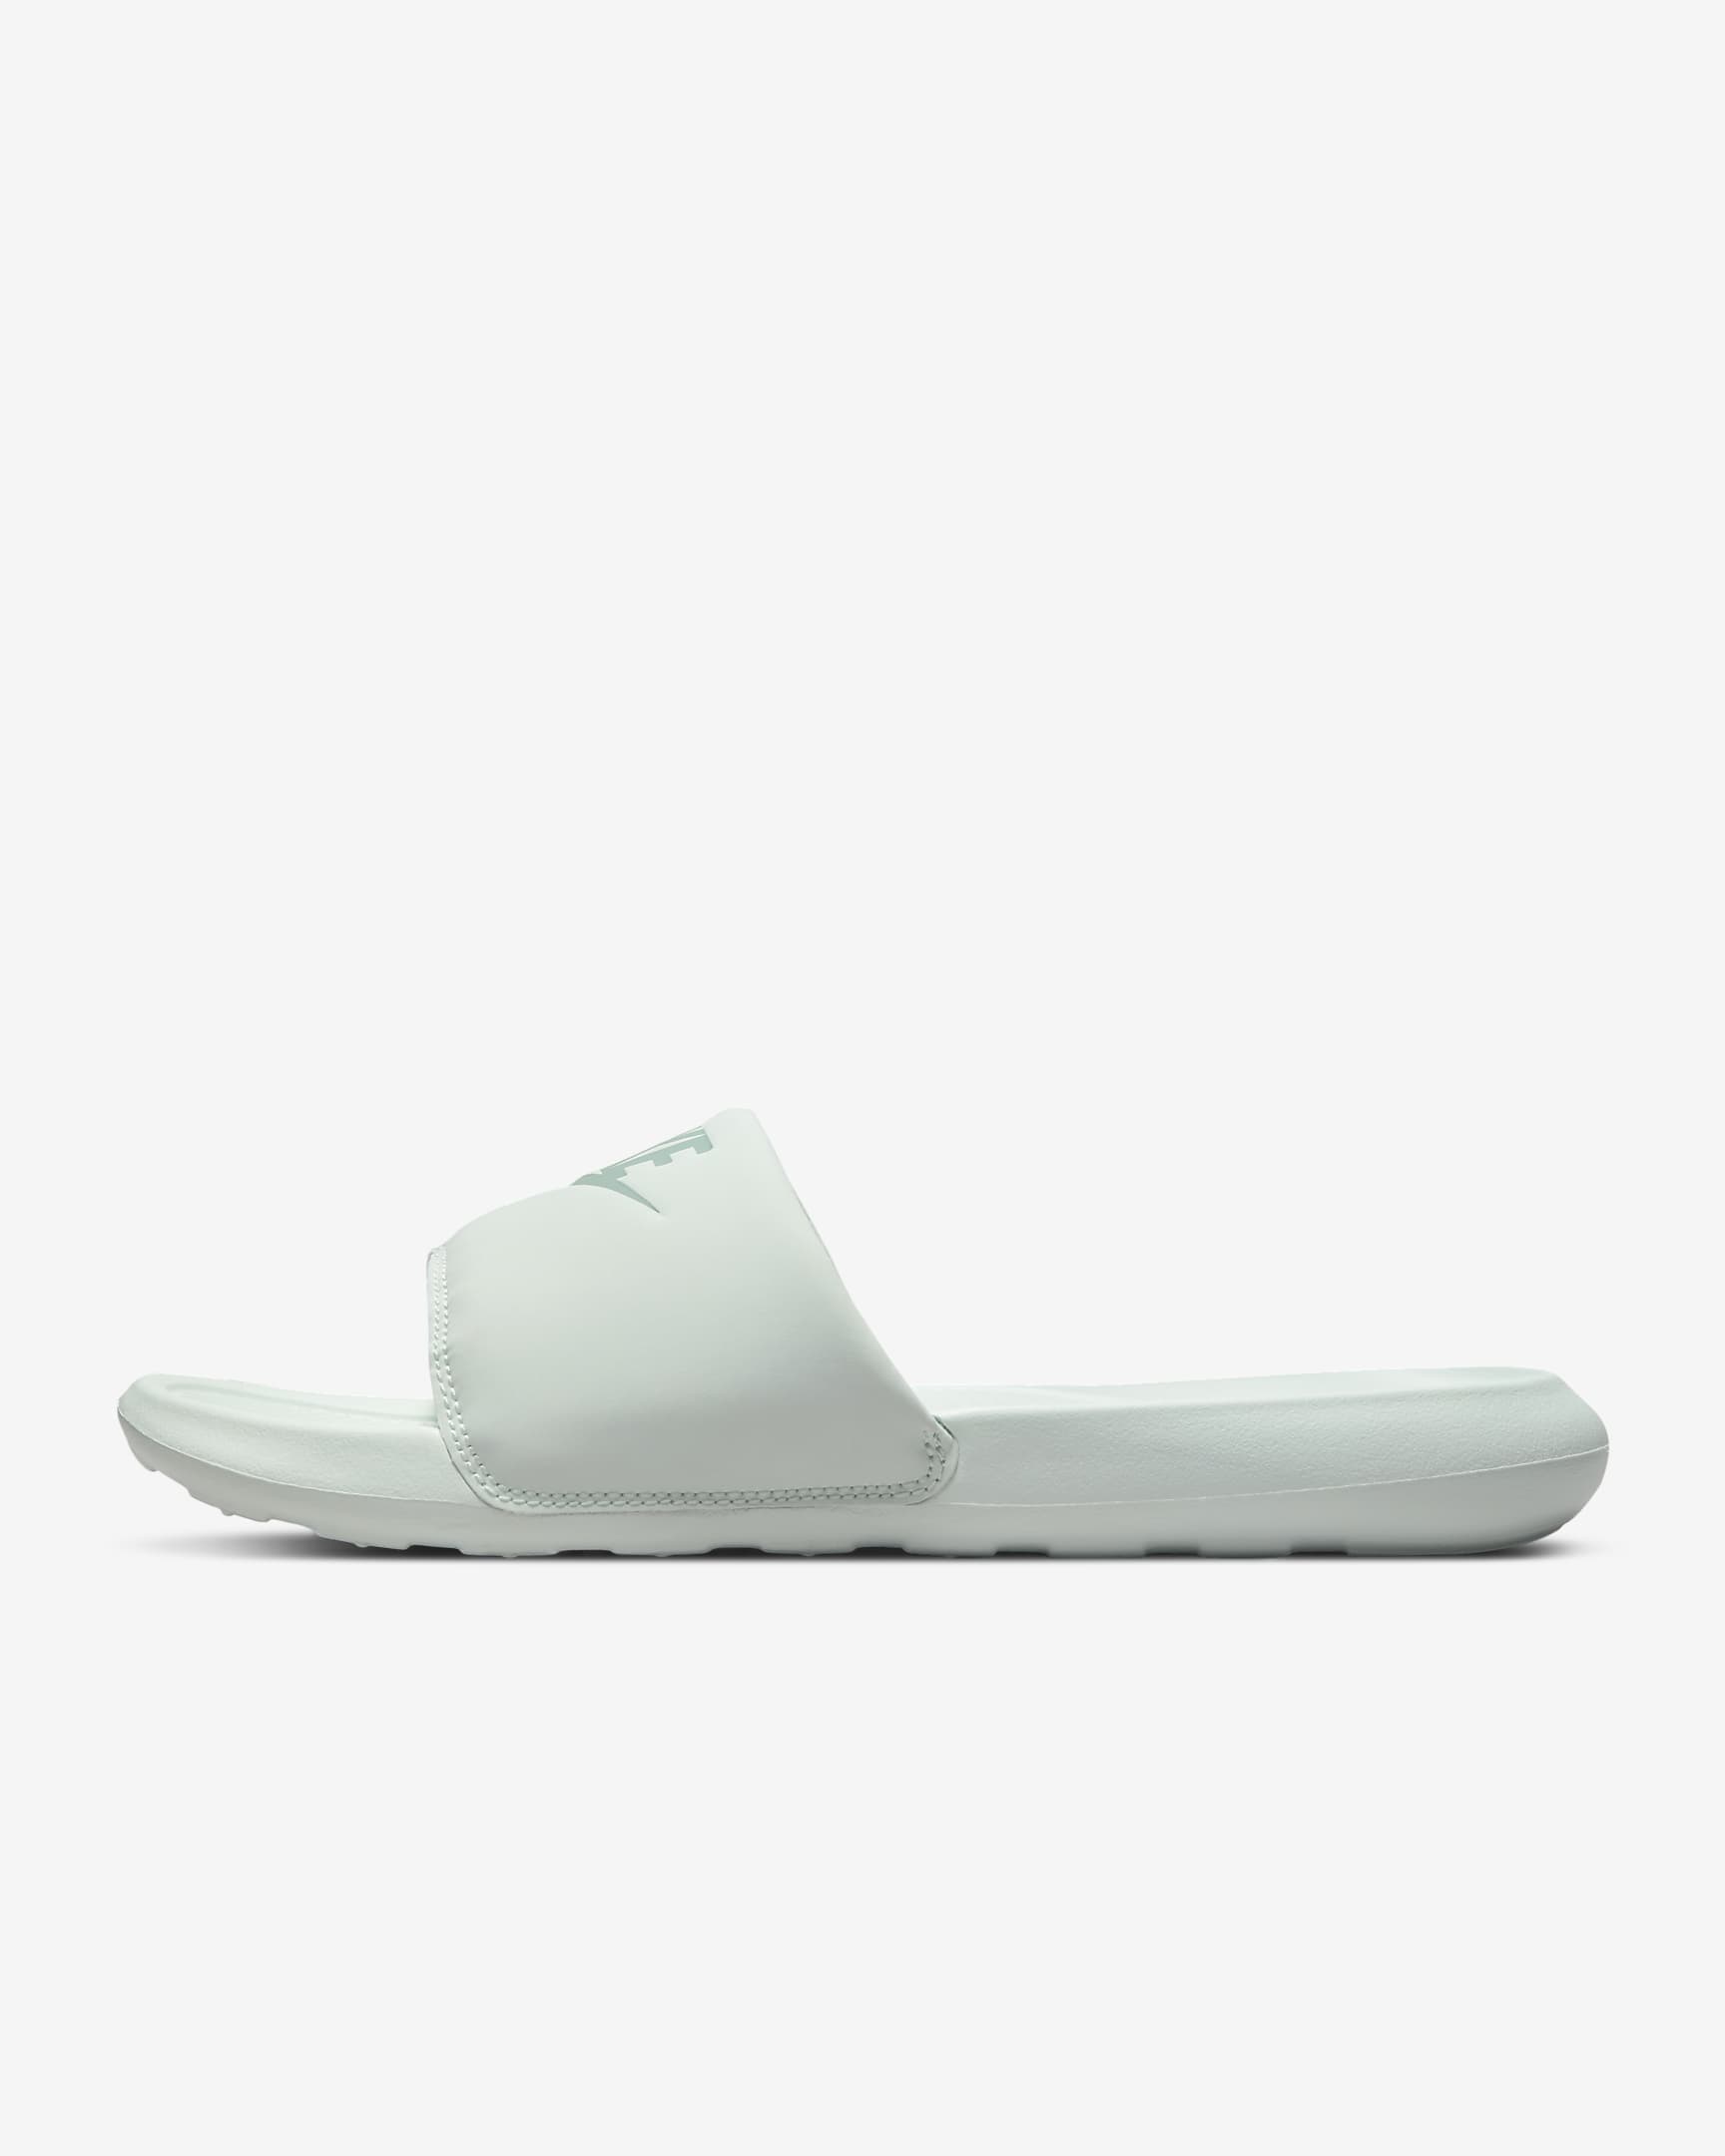 Nike Victori One Women\'s Slides Barely Green/Barely Green/Dusty Sage